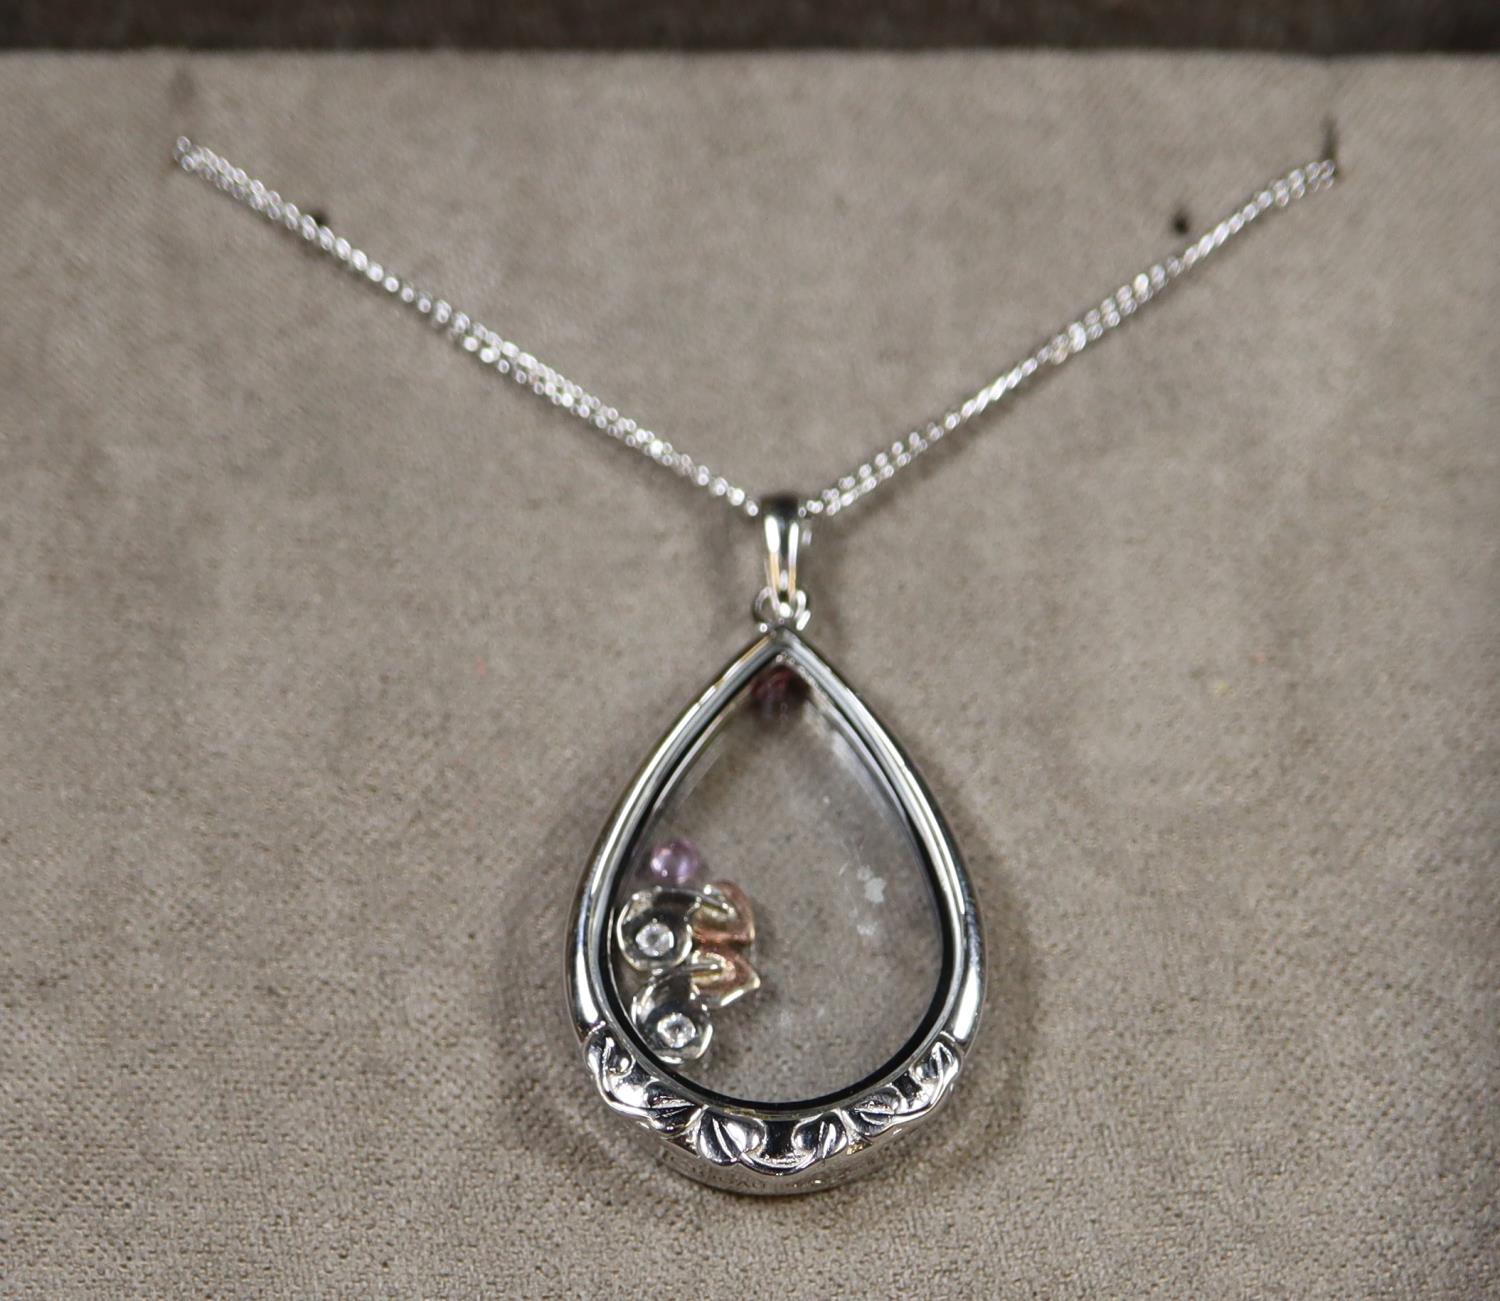 Clogau silver, ?Inner Charm? pendant and chain. (B.P. 21% + VAT) - Image 2 of 2